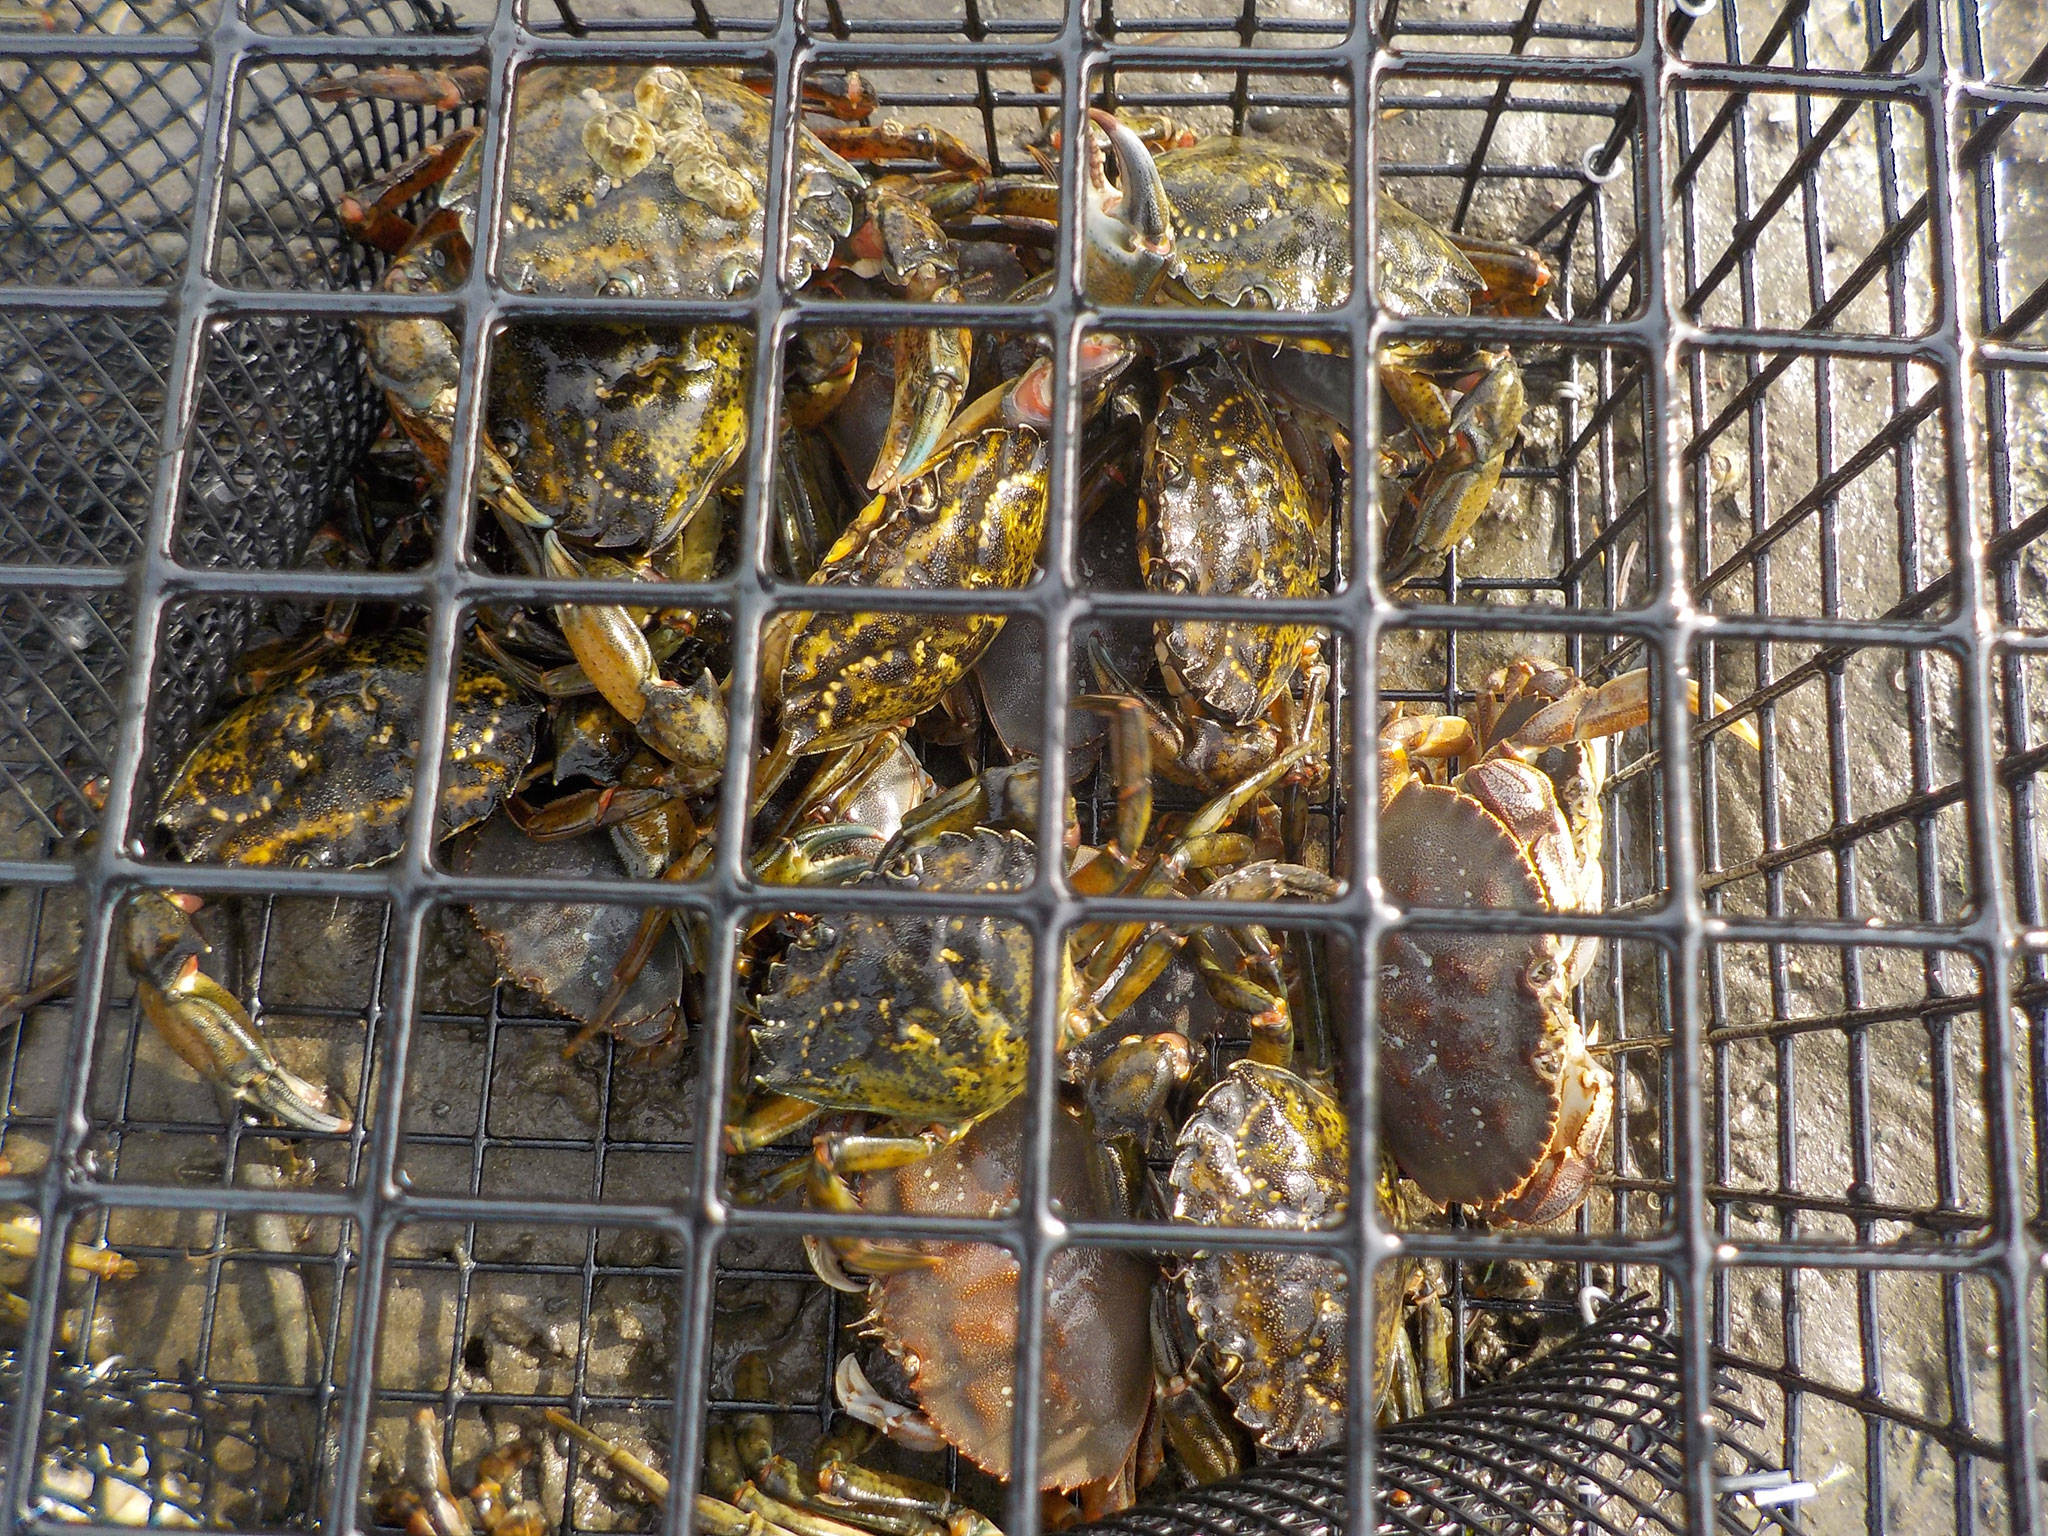 Left, last year, the Makah Tribe captured its highest total of European green crab but Adrianne Akmajian, a marine ecologist for the Makah Fisheries Management, said they might not begin trapping until May due to concerns for the spread of the coronavirus. Photo courtesy of Adrianne Akmajian